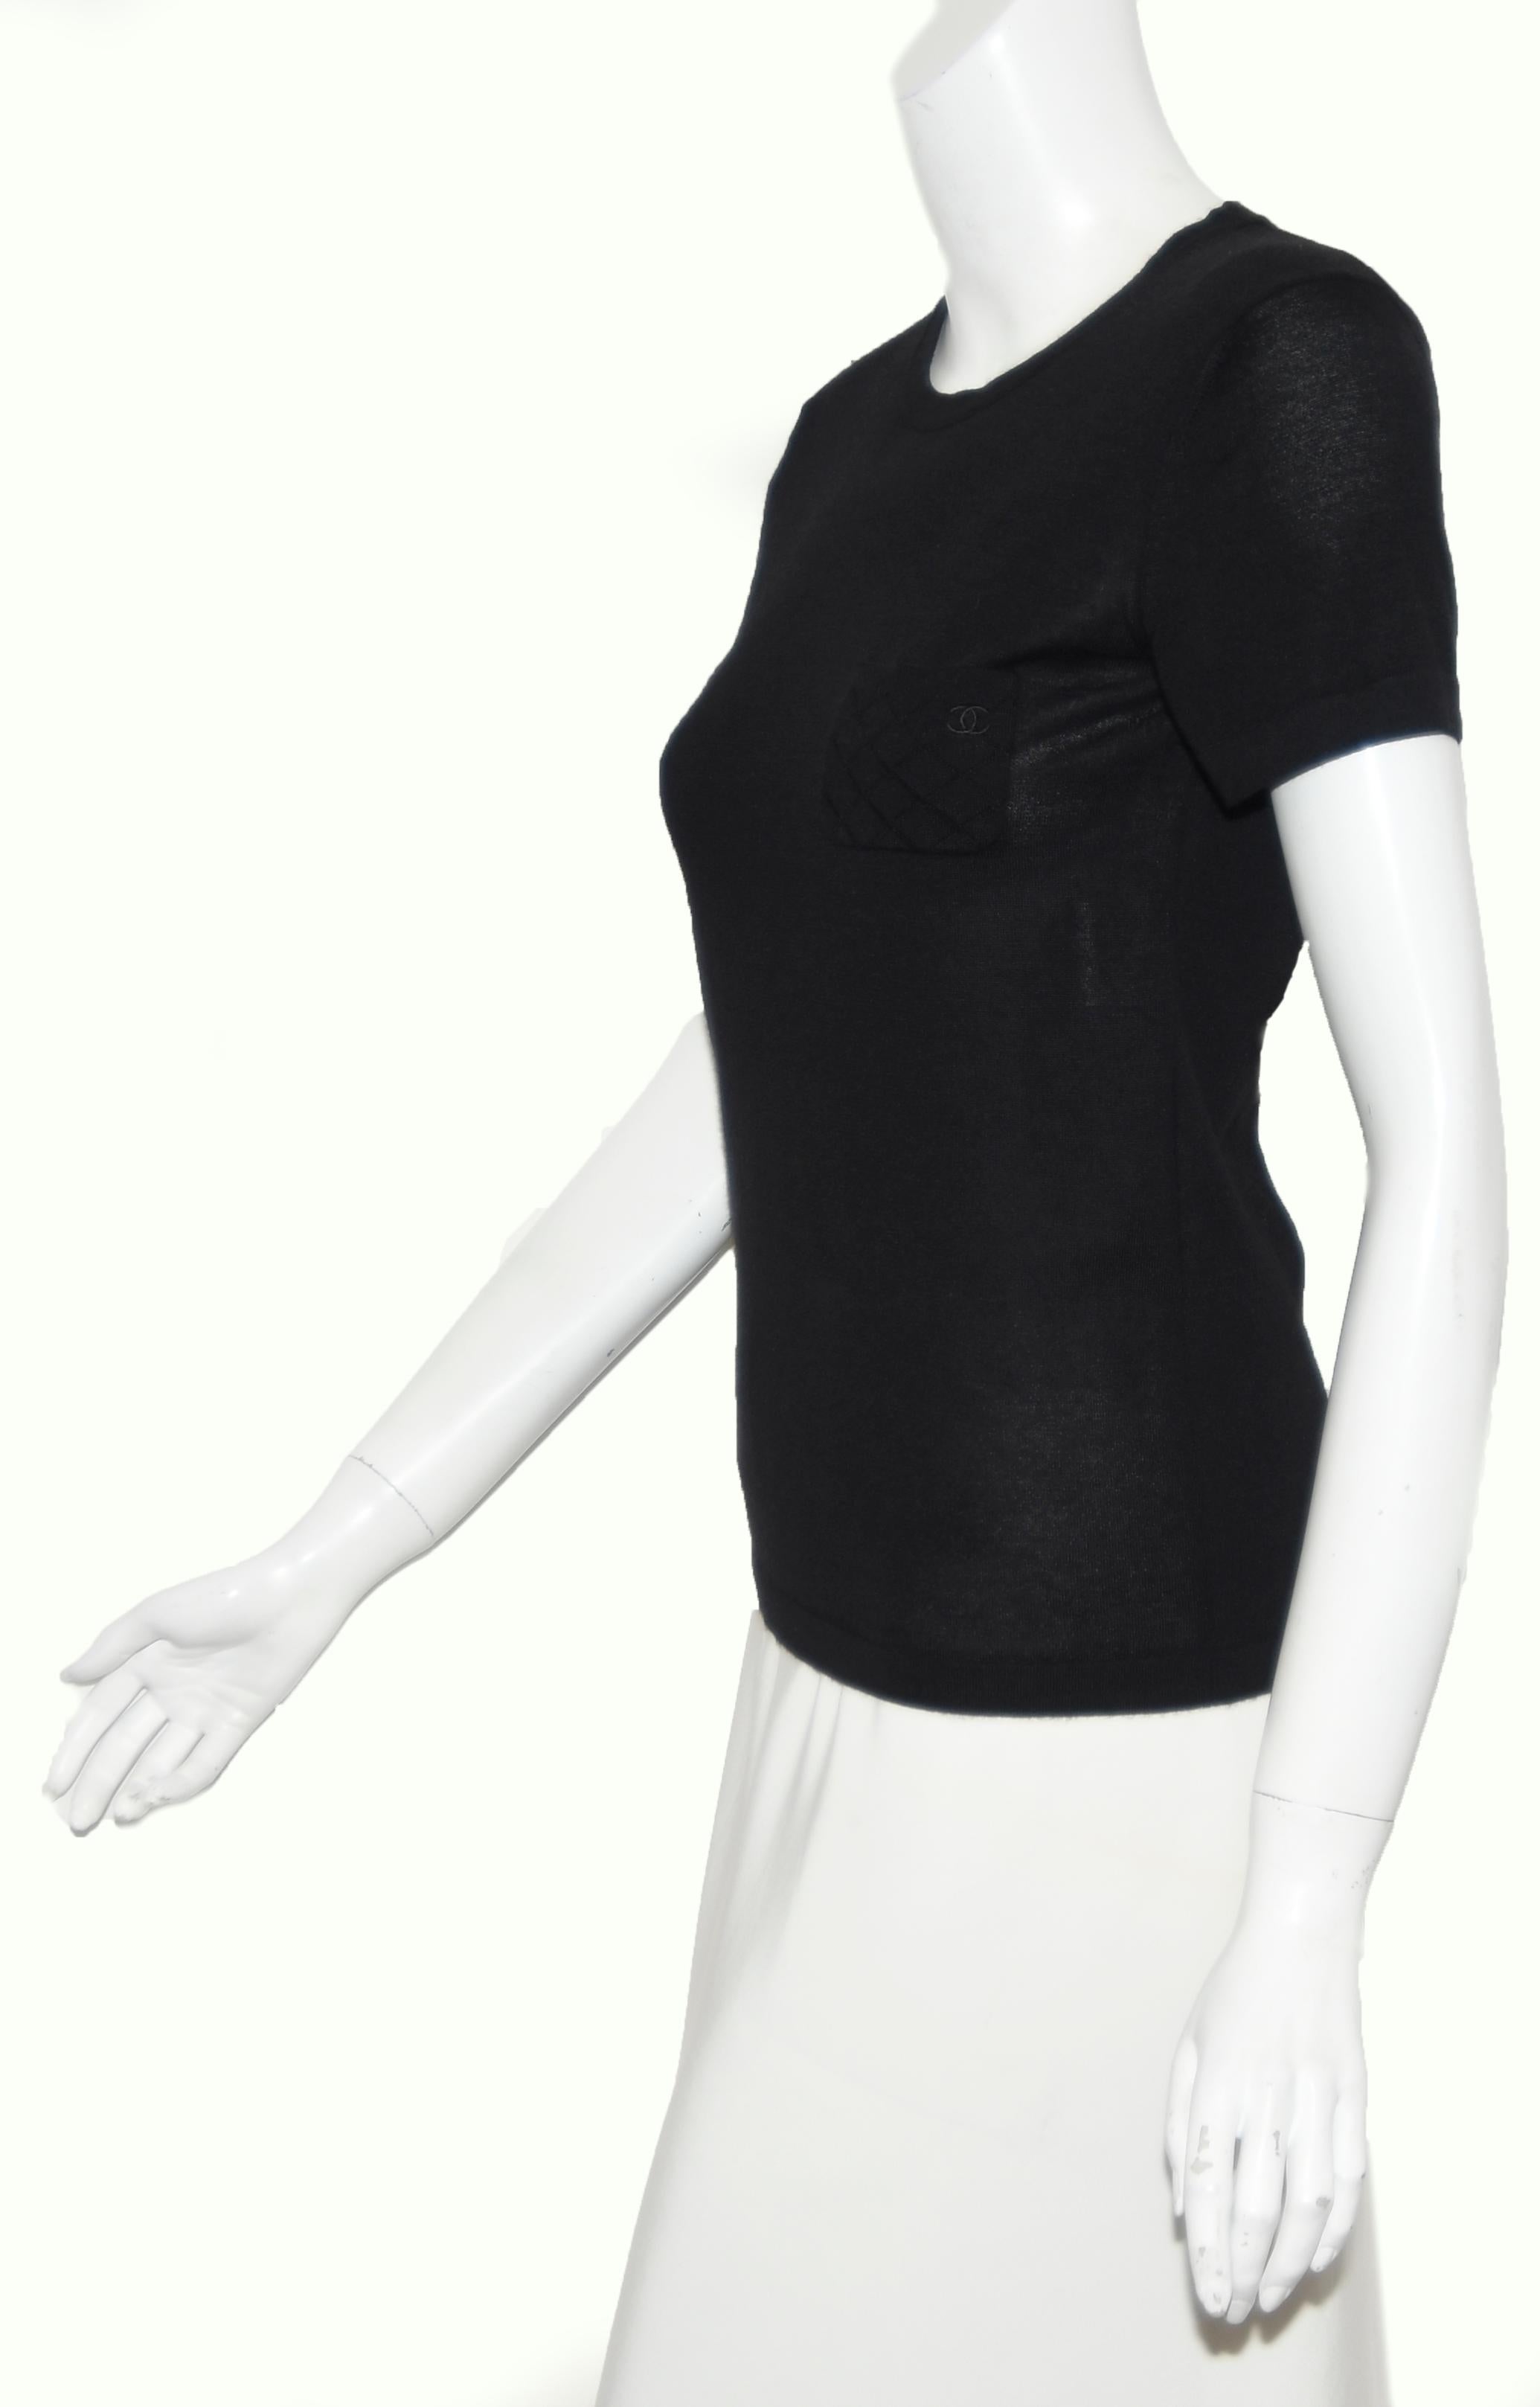 Chanel black cashmere and silk short sleeve top and round neckline is not lined.  This Chanel T shirt has one small patch pocket on left side of chest that has the signature Chanel diamond print and CC embroidered logo.   The soft cashmere and silk